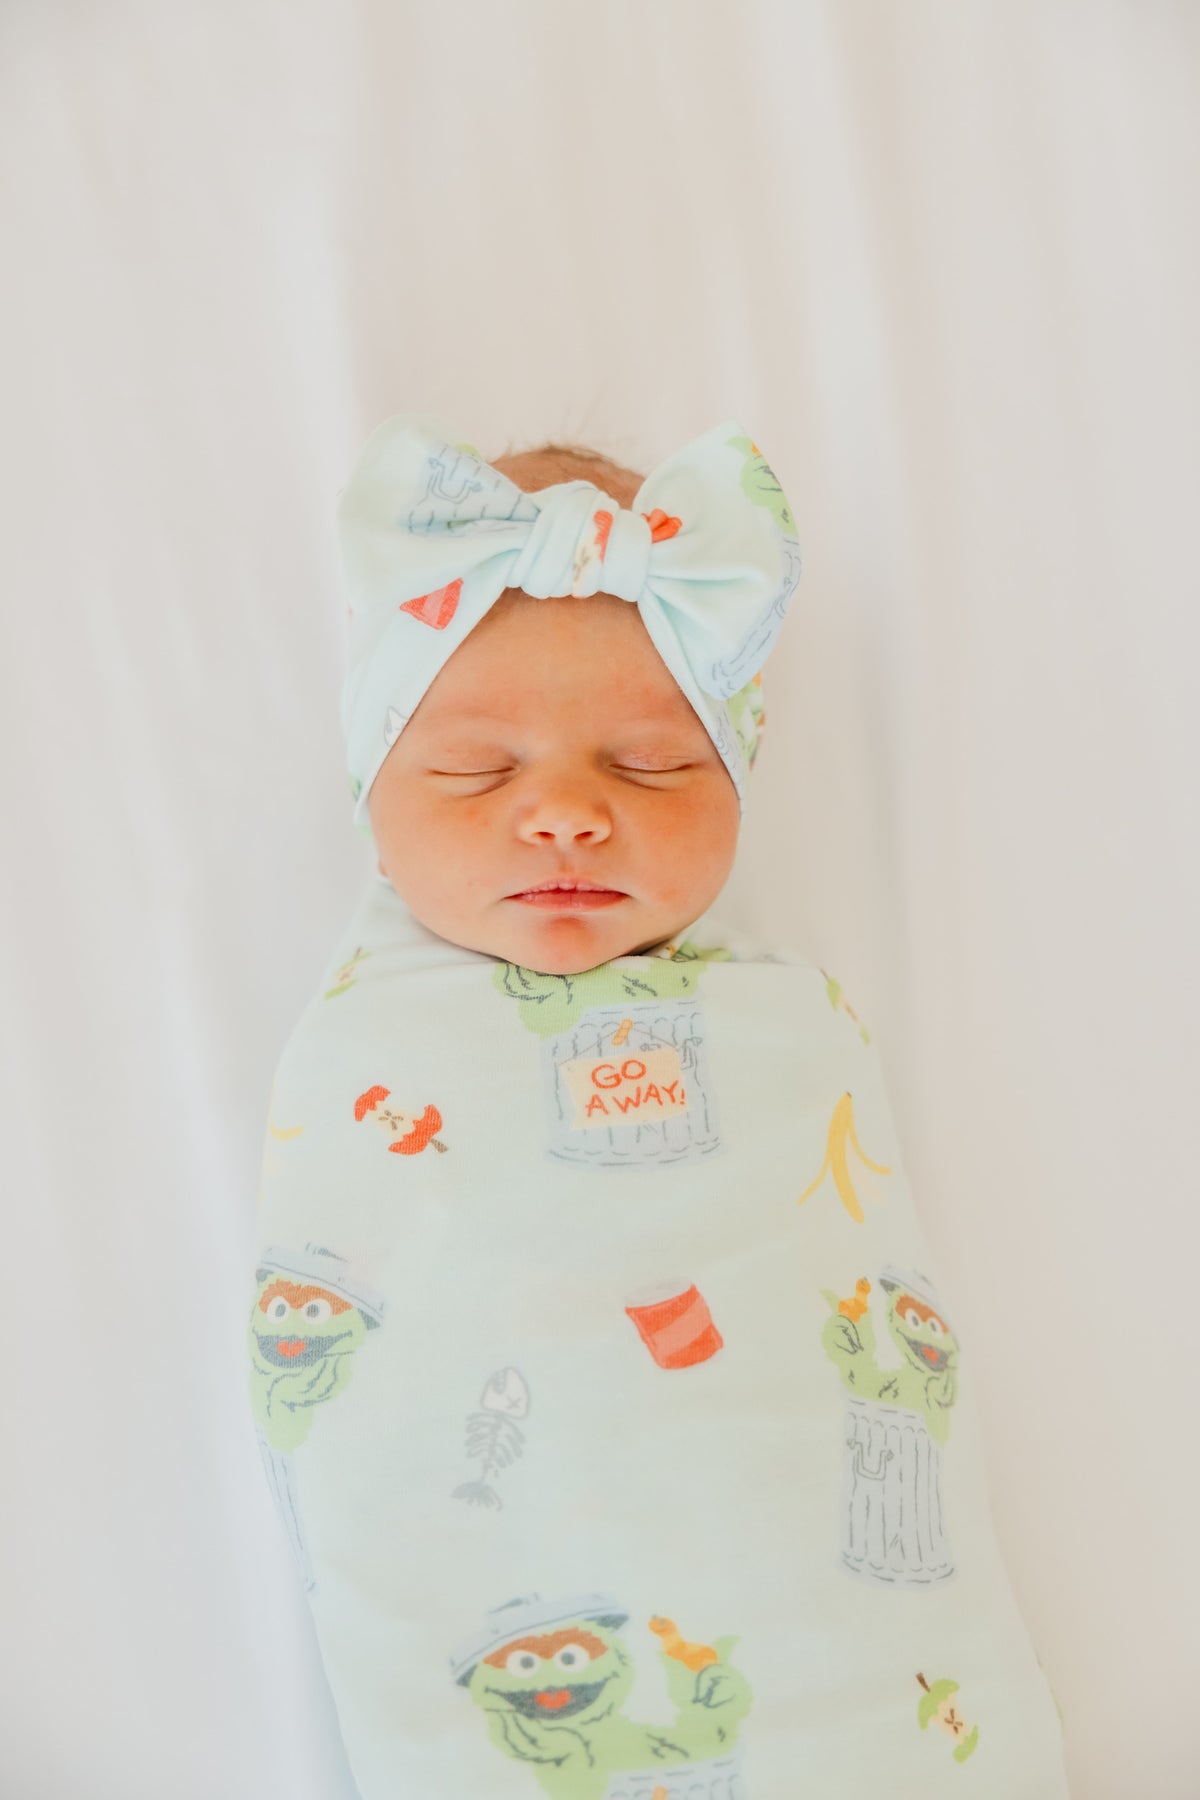 Knit Swaddle Blanket - Oscar the Grouch